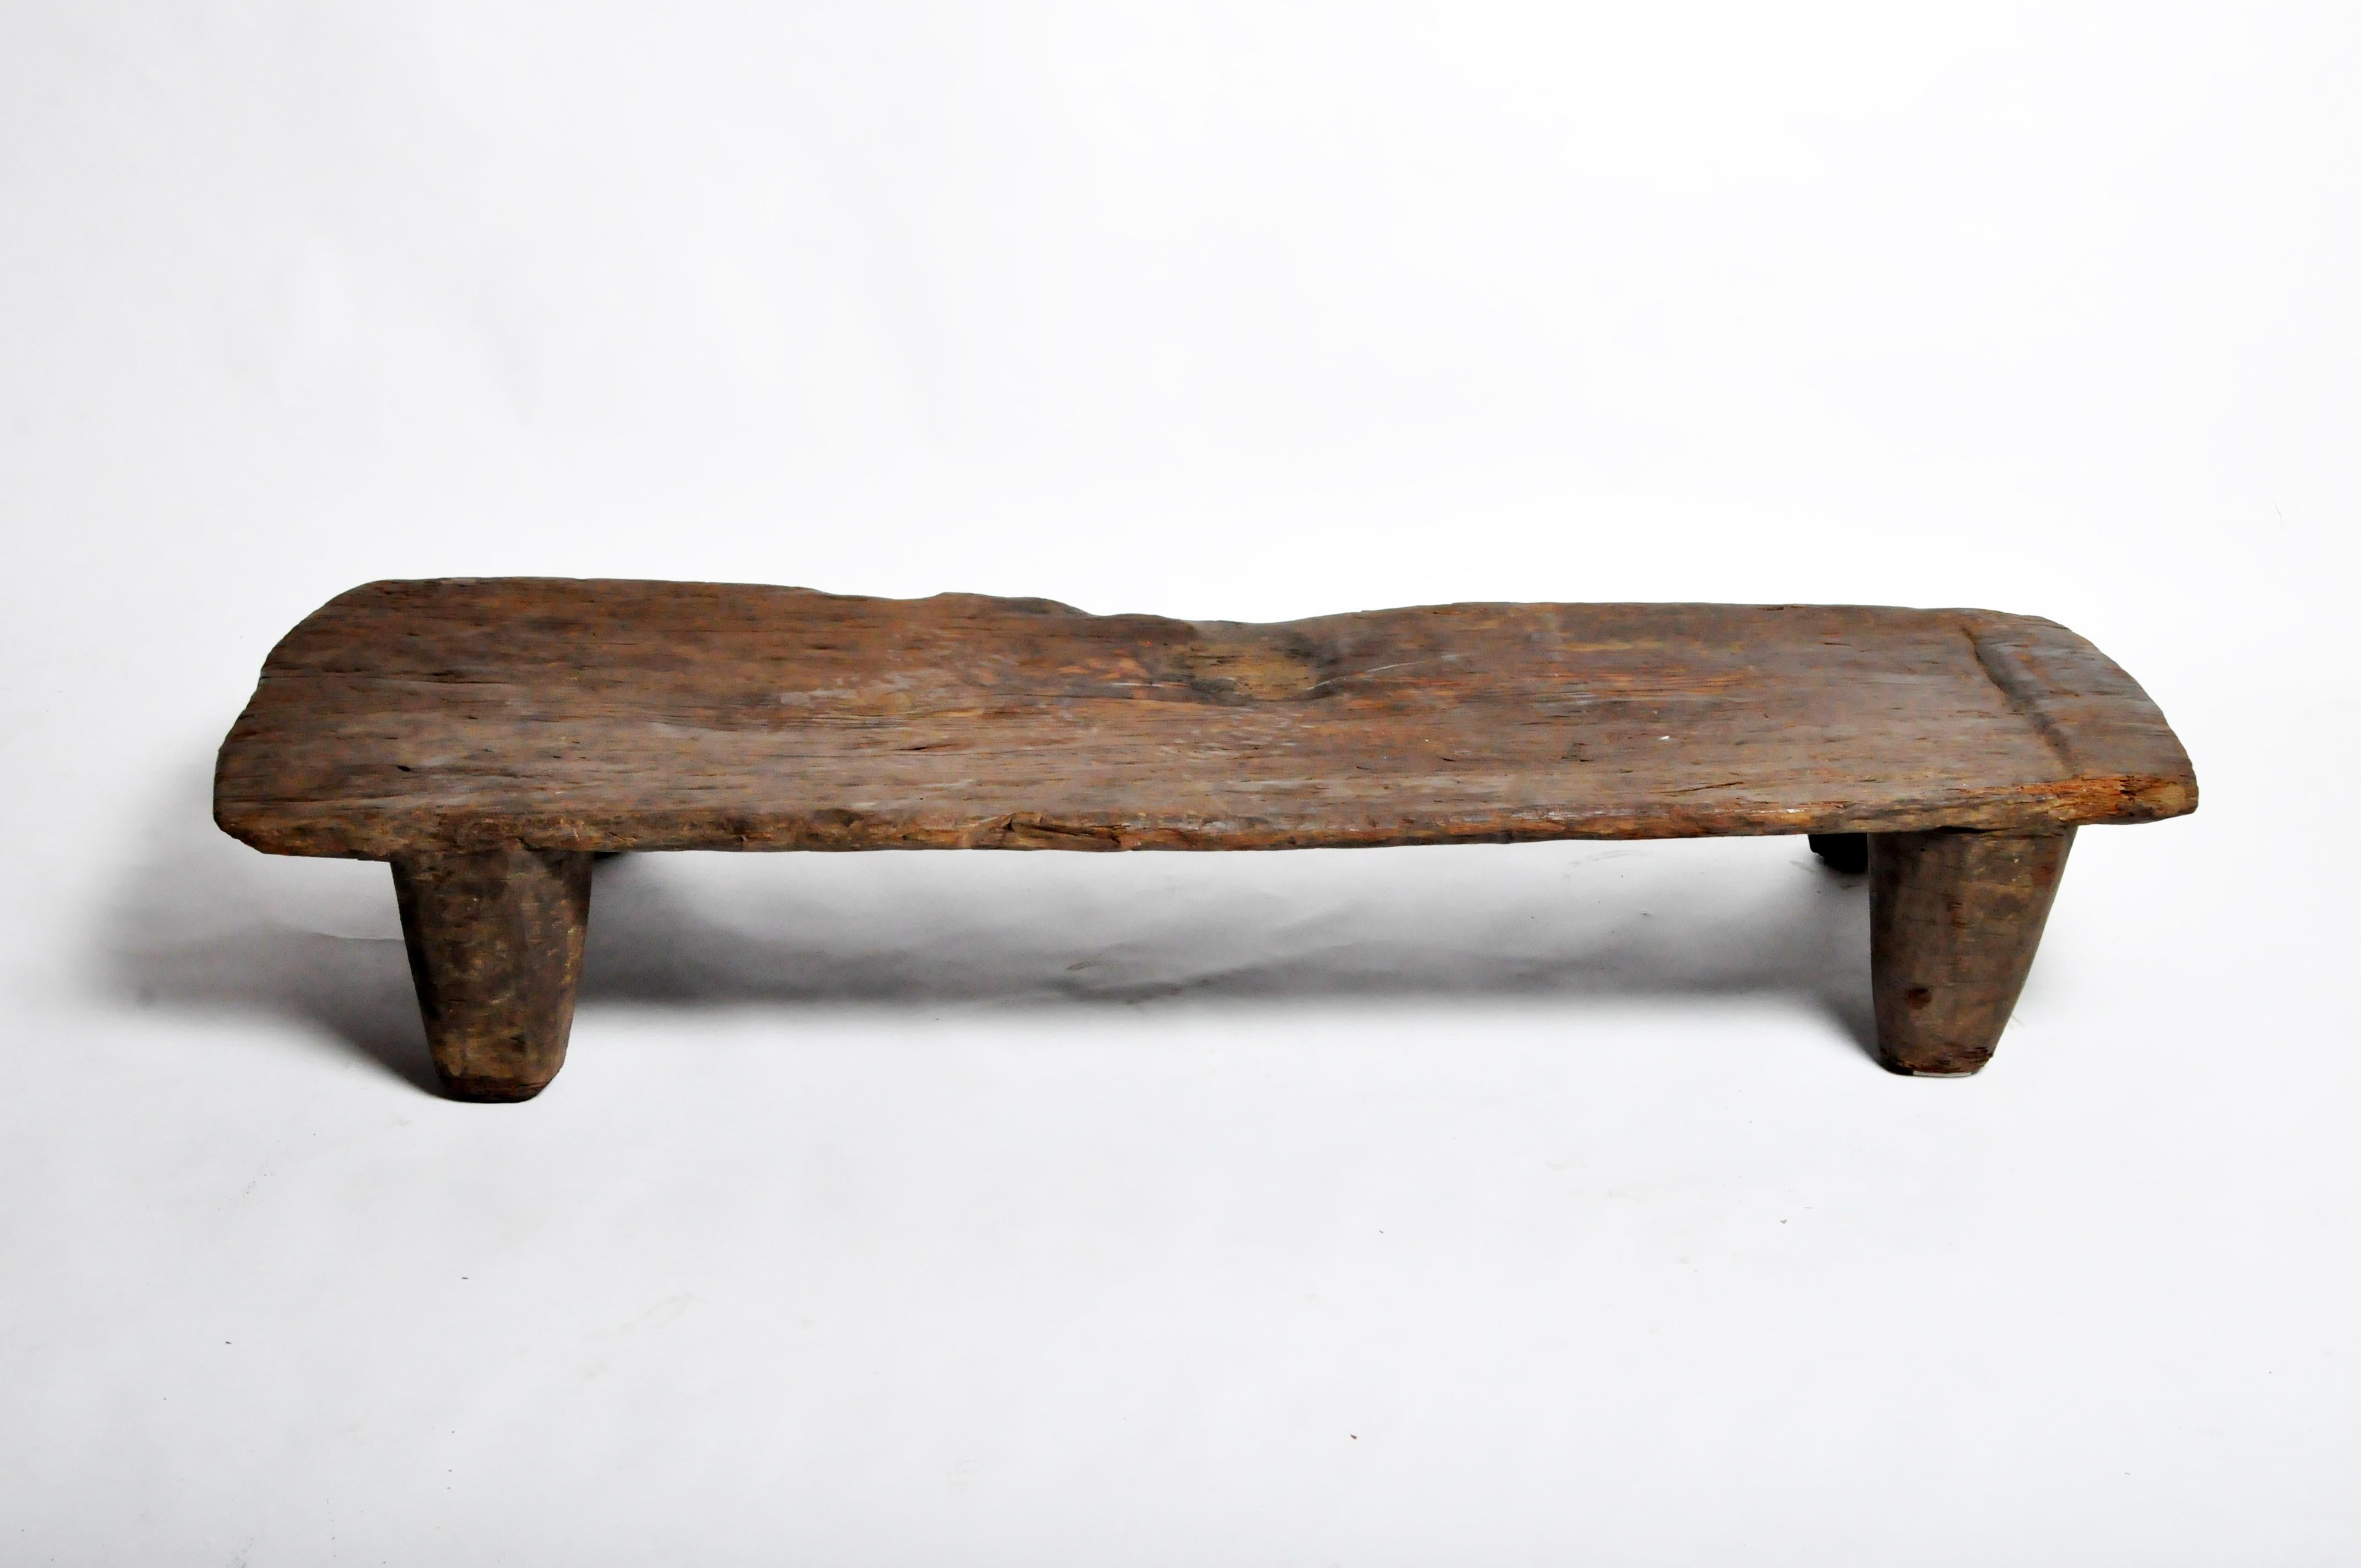 The Naga tribesman slept on elevated wooden beds to keep off the moist earth in their huts. Like most Naga artifacts, this bed is carved from a single piece of wood.
 